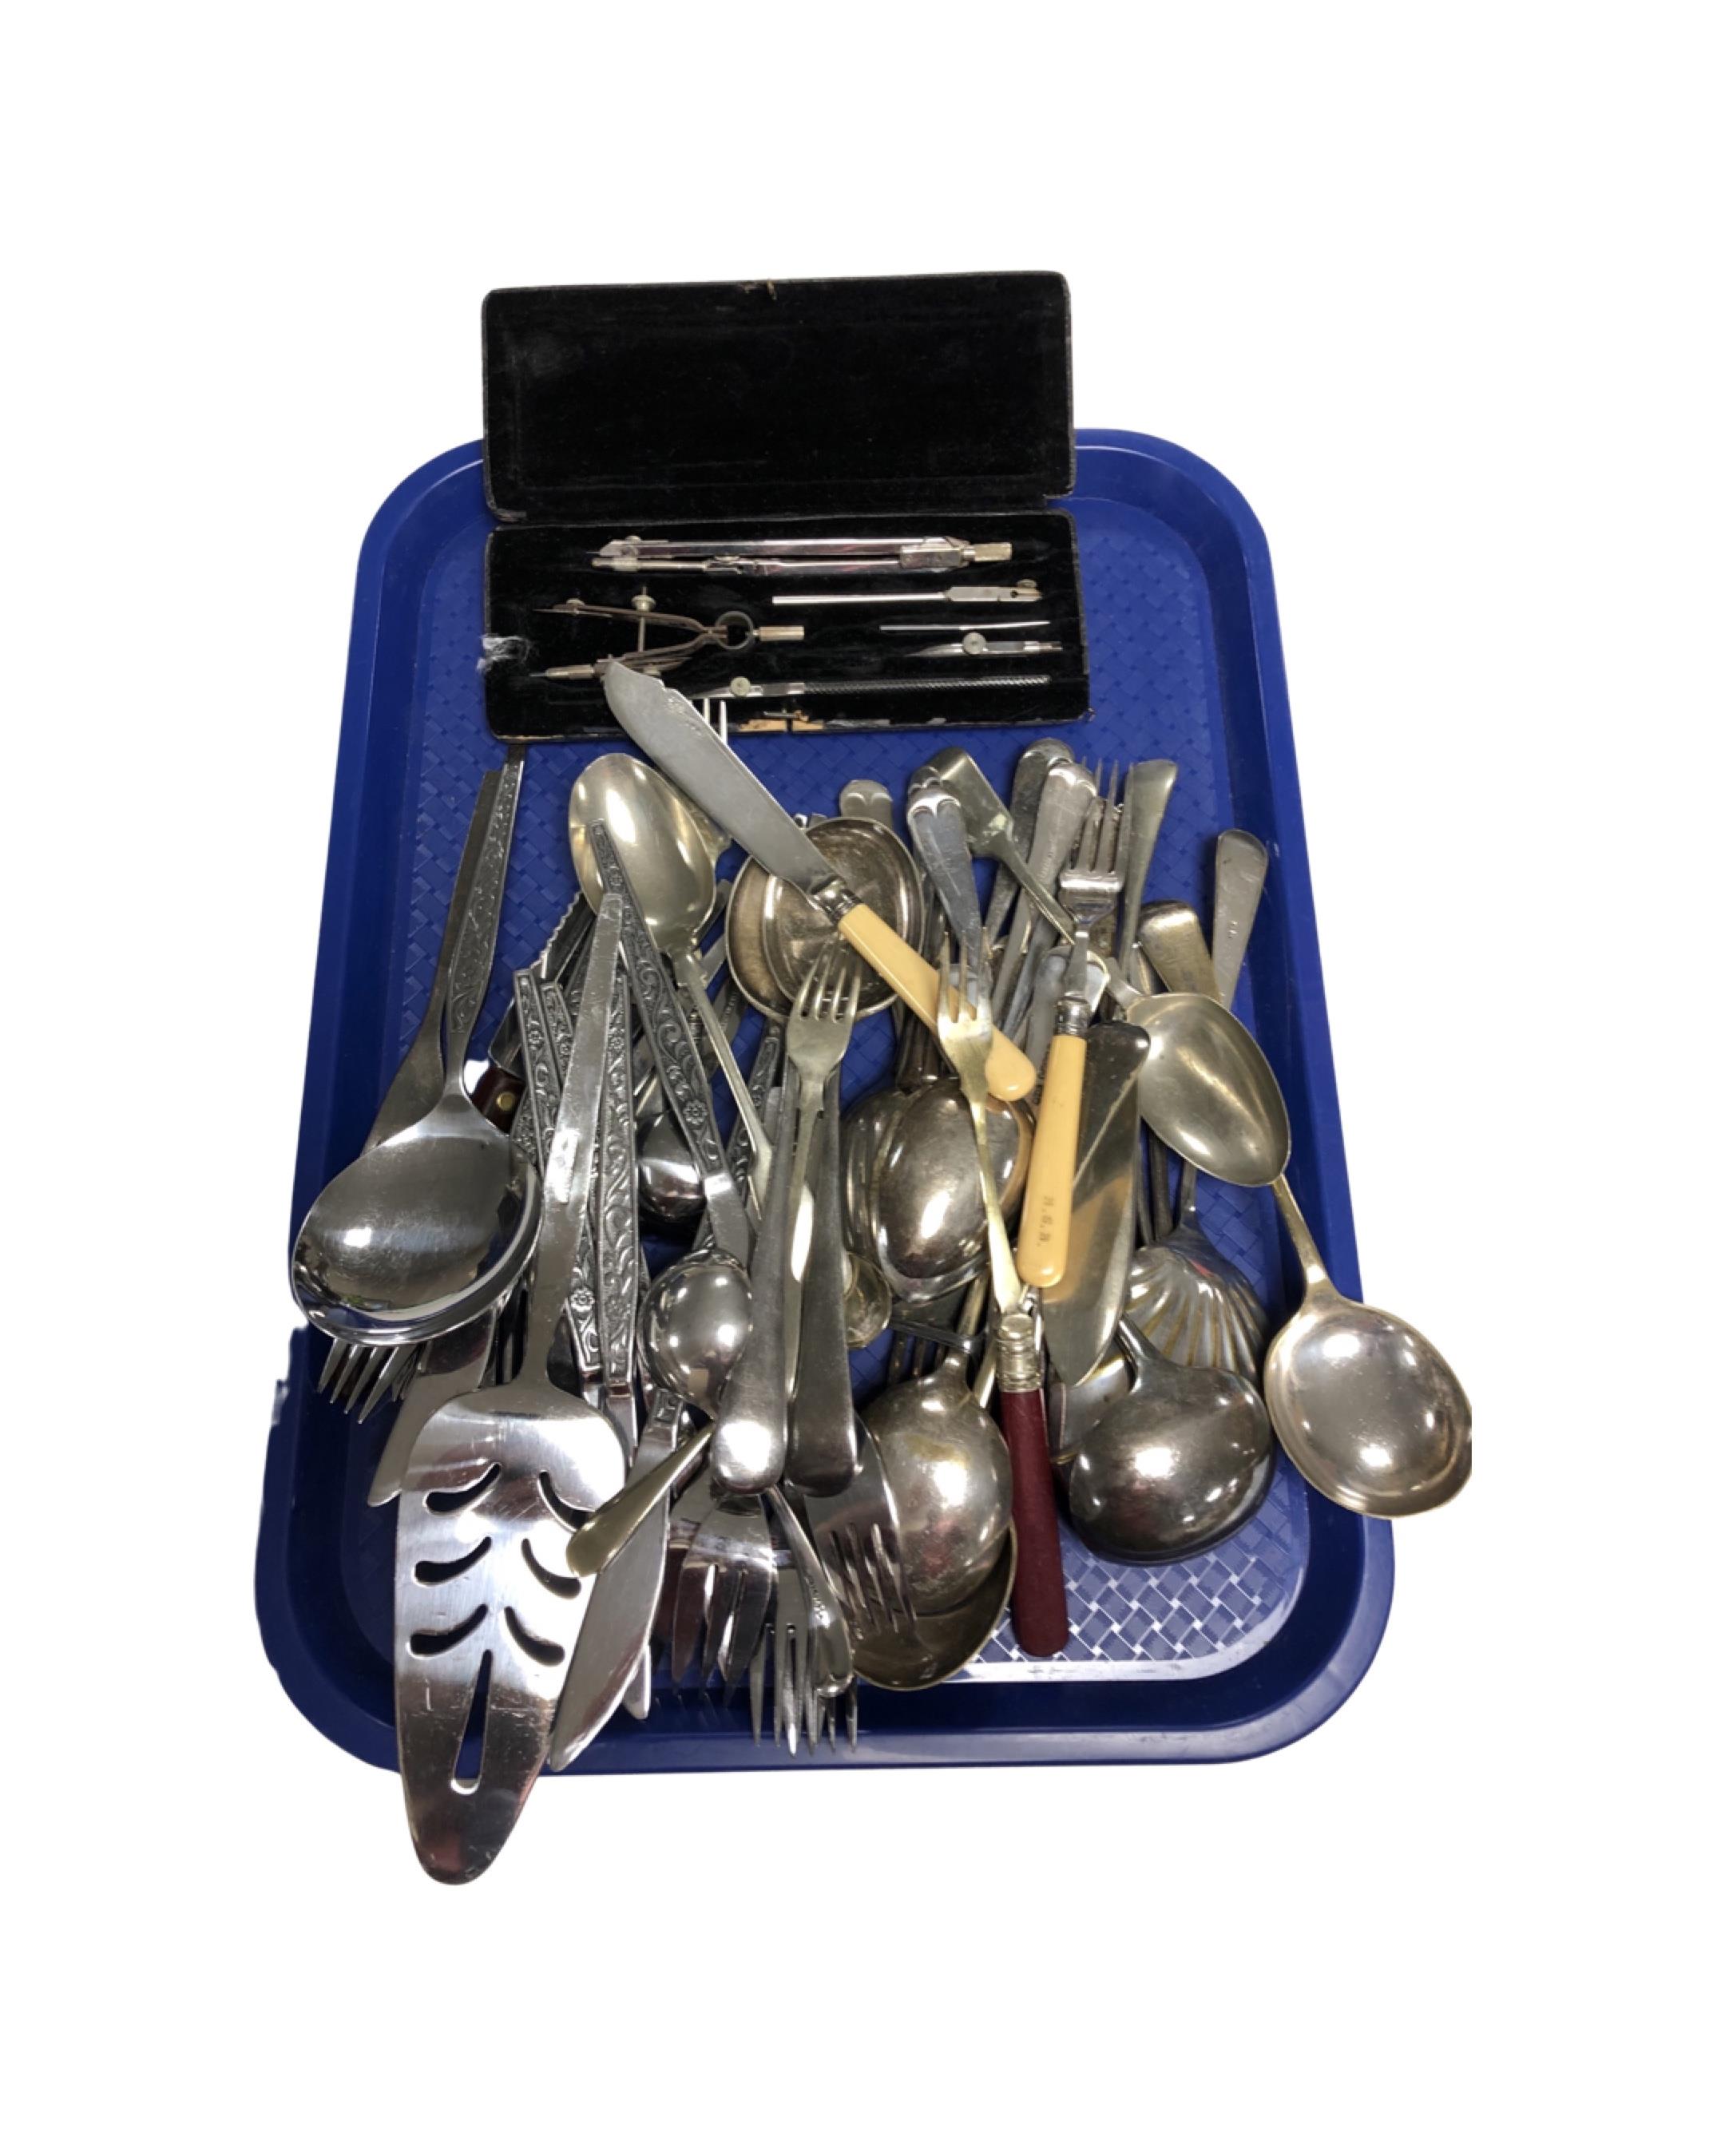 A tray containing a cased drawing set, assorted plated and stainless steel cutlery.